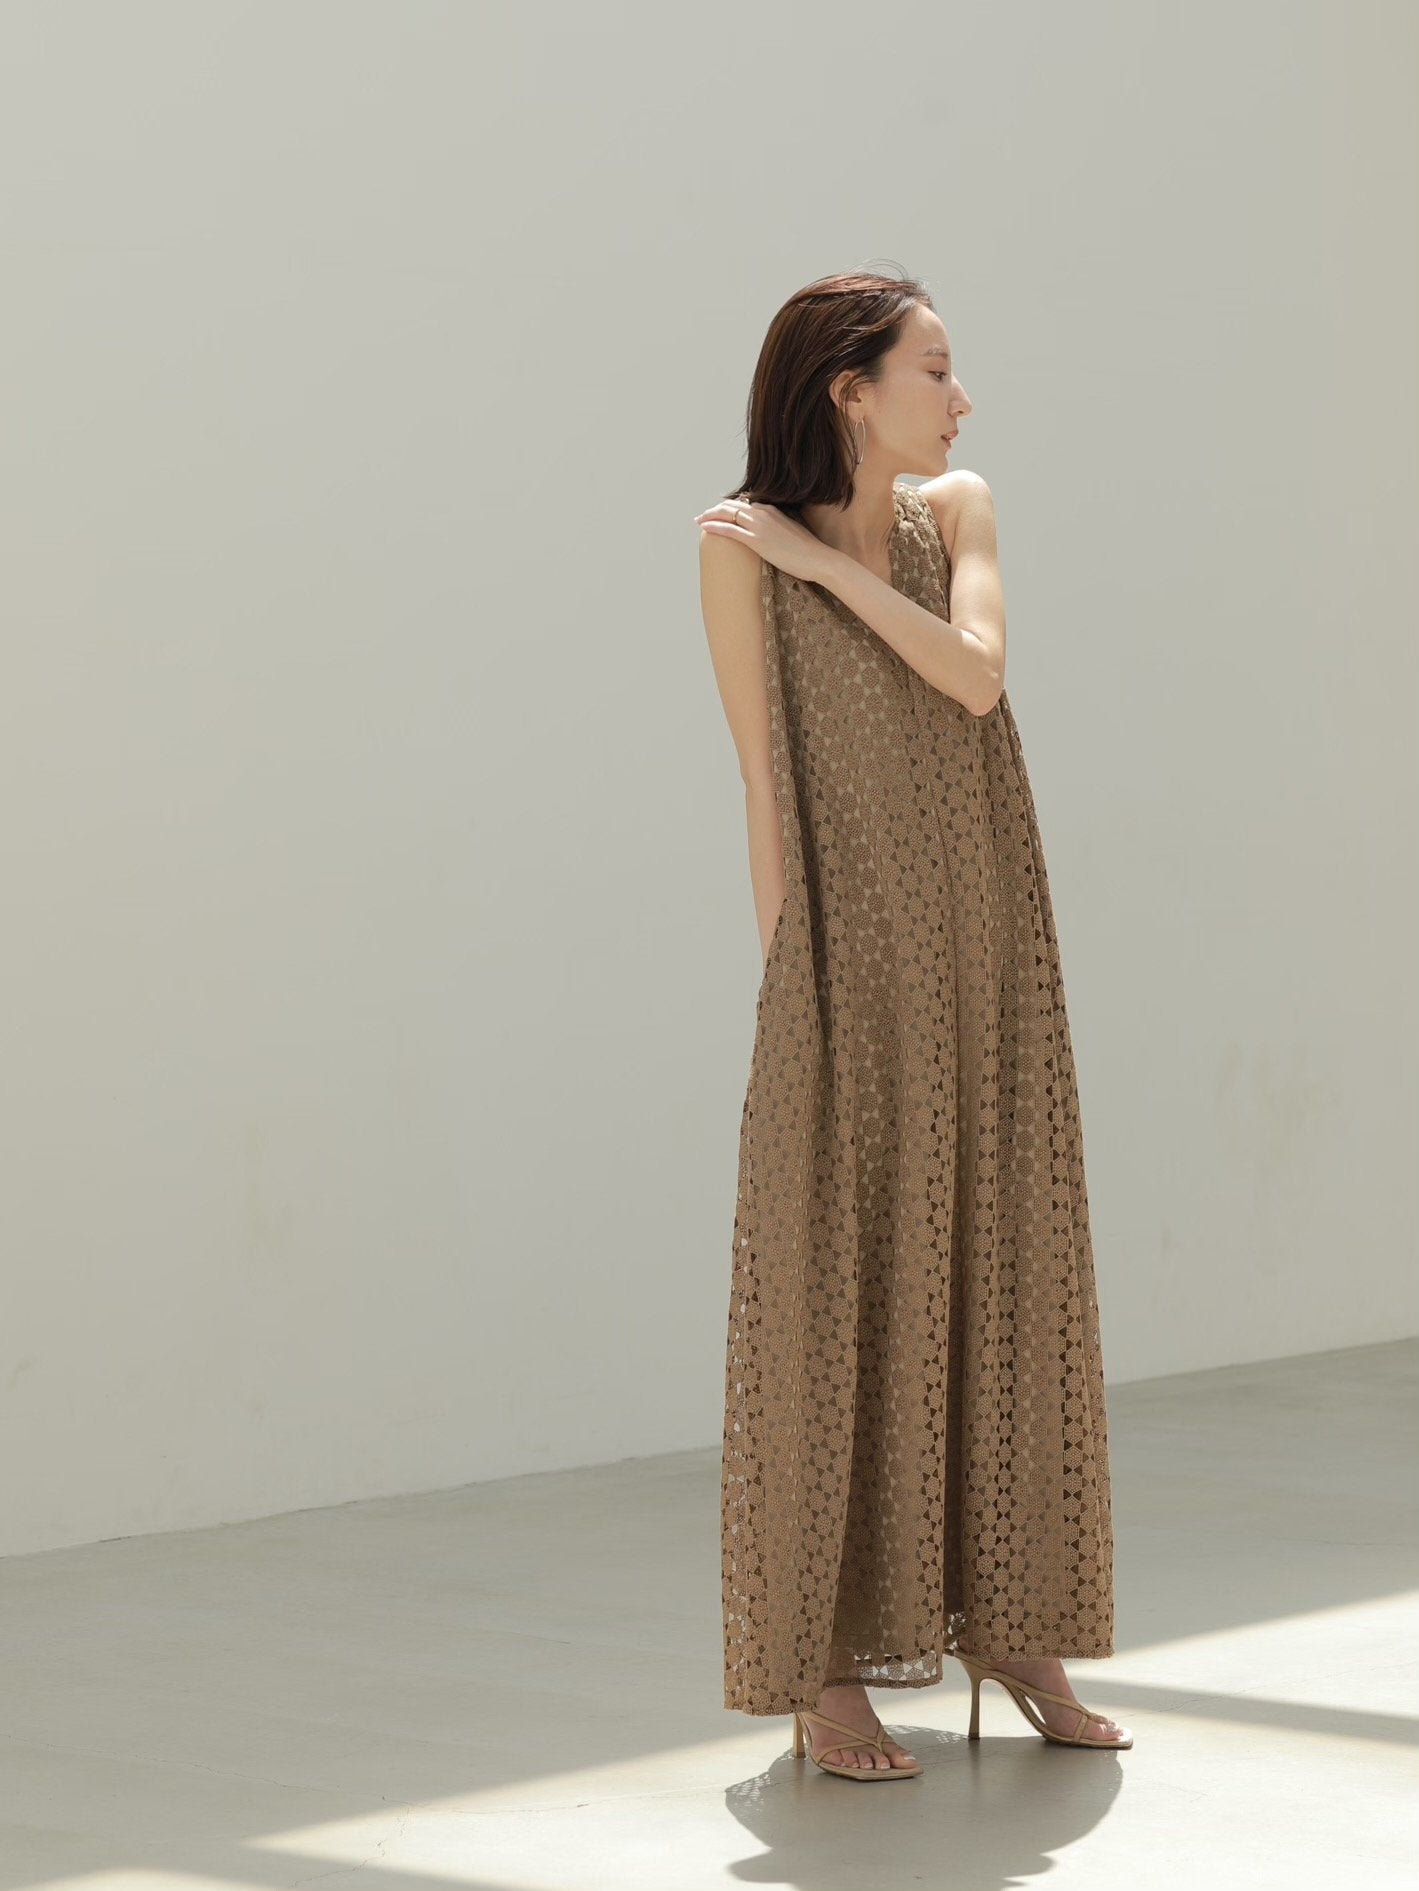 2021 SUMMER COLLECTION vol.1】 GEOMETRY LACE DRESS / PLEATS PENCIL ...